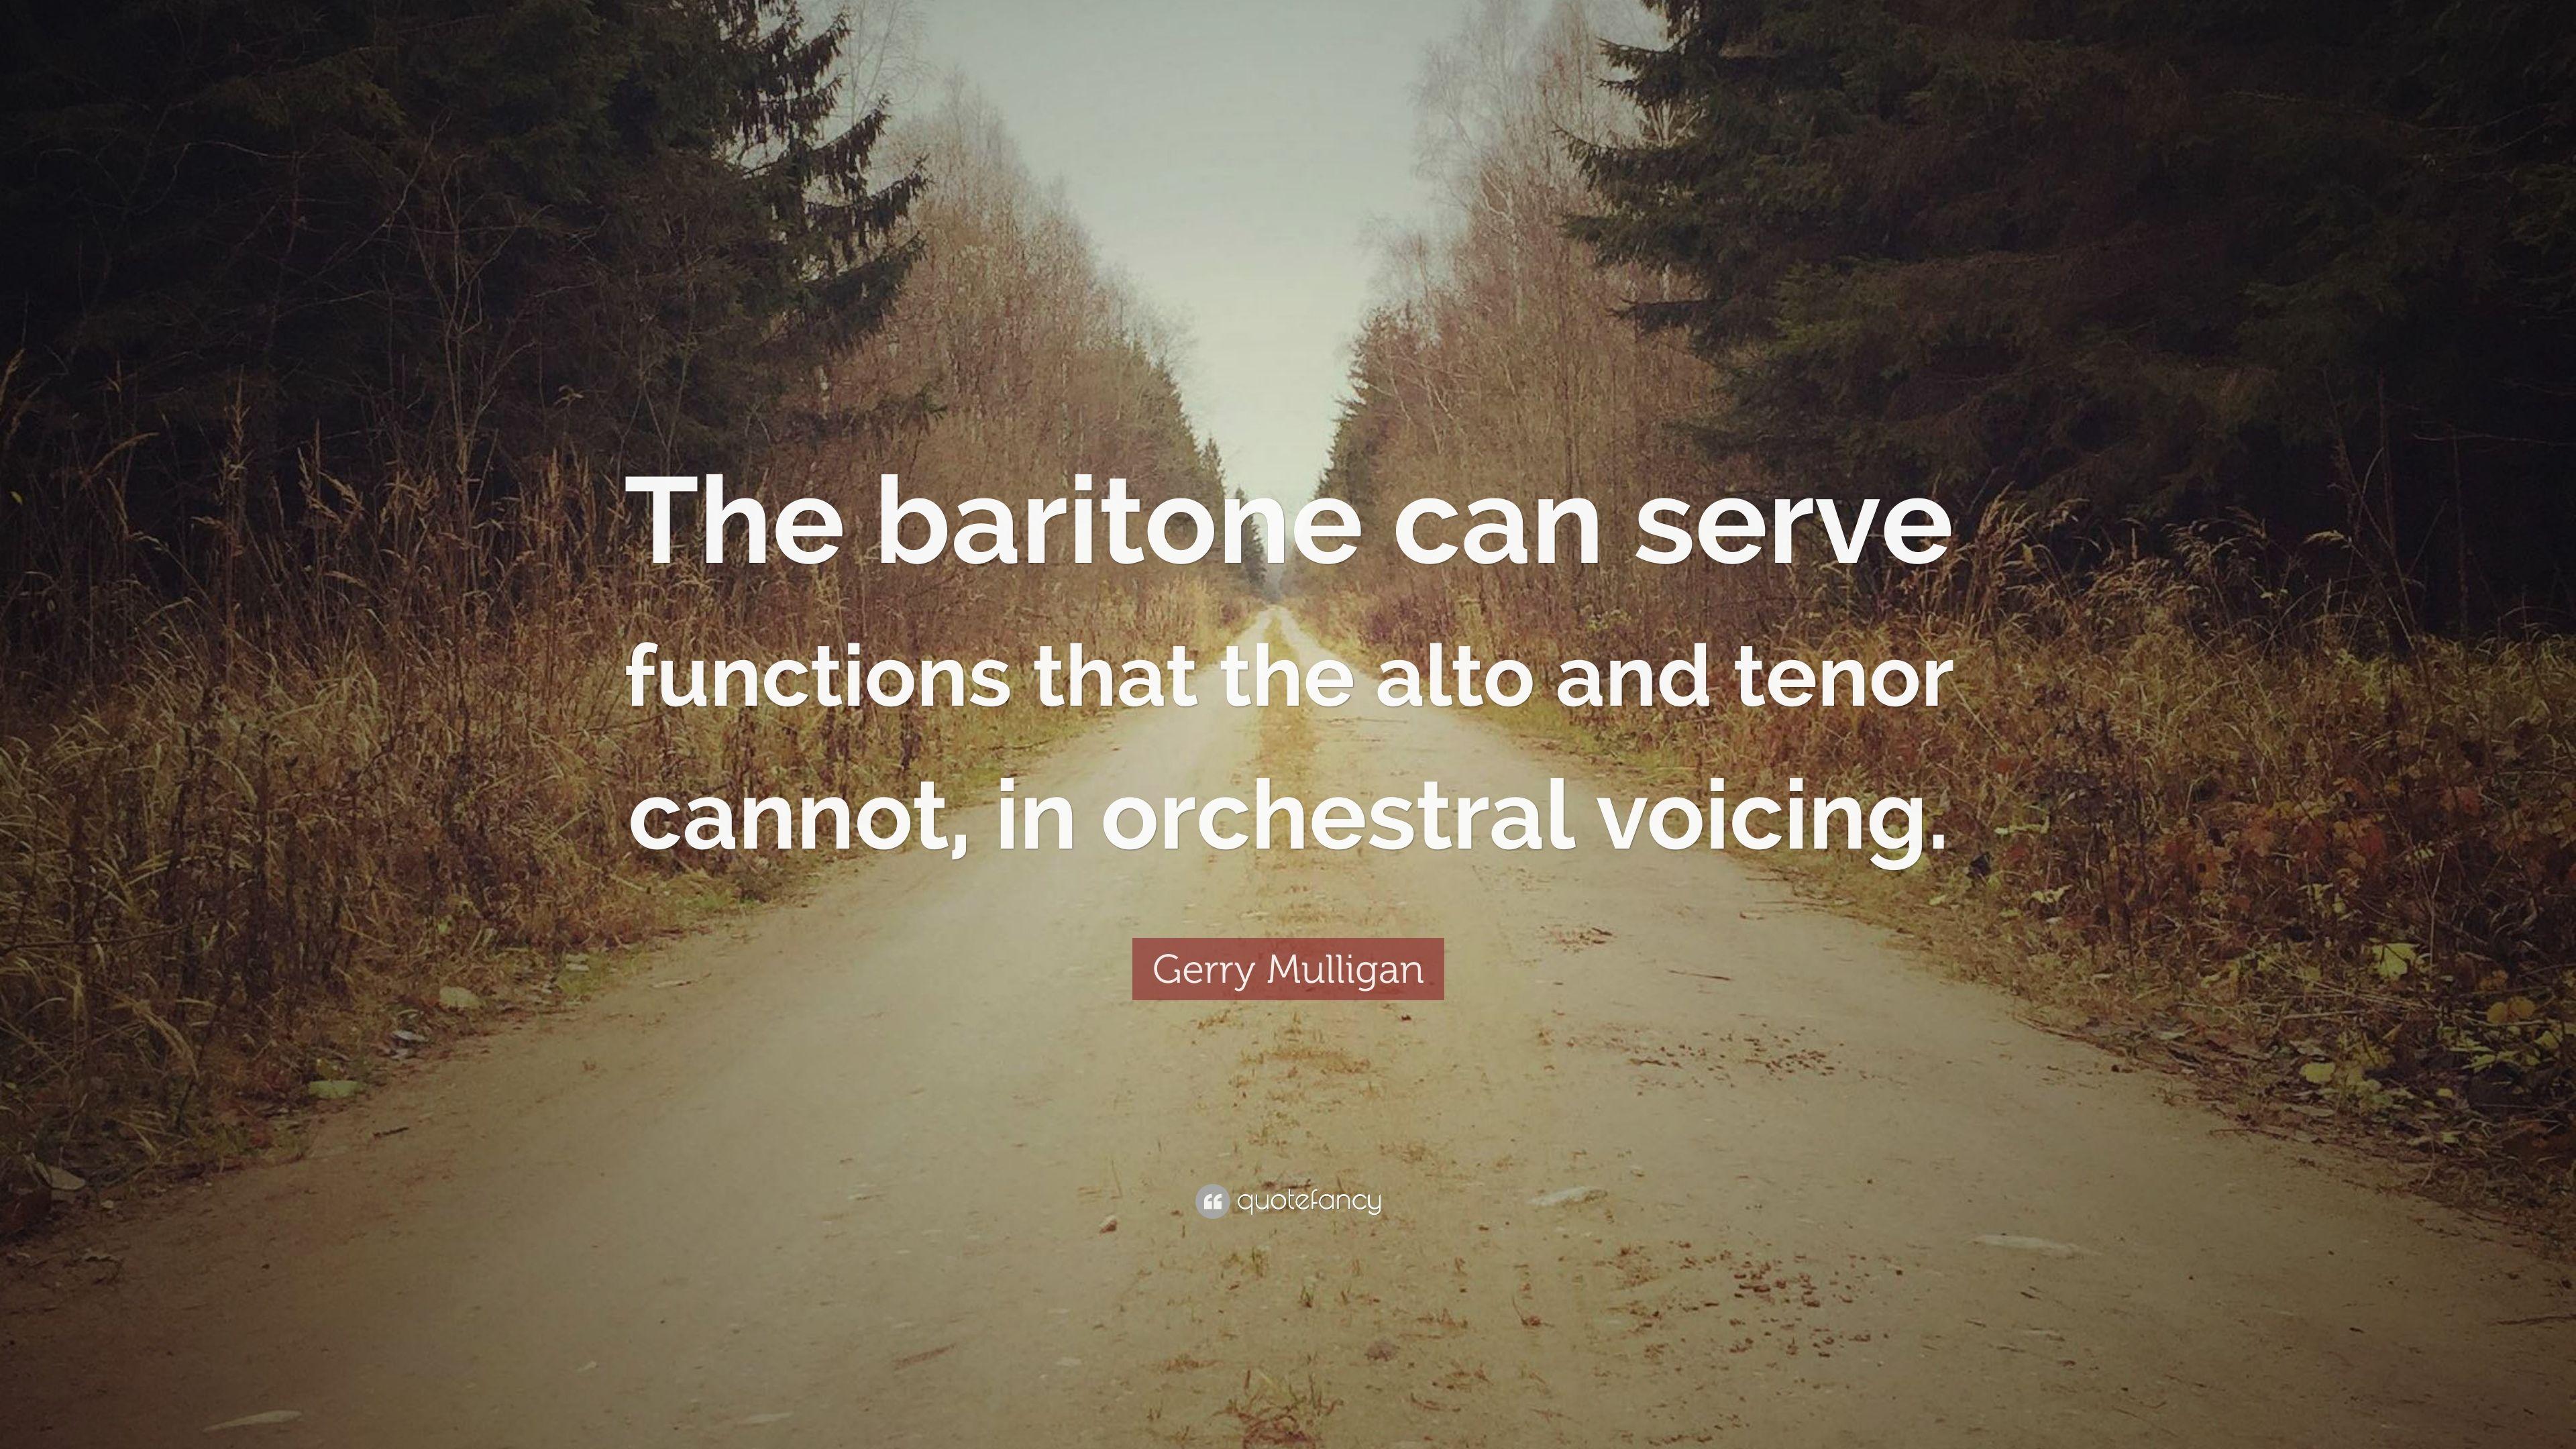 Gerry Mulligan Quote: “The baritone can serve functions that